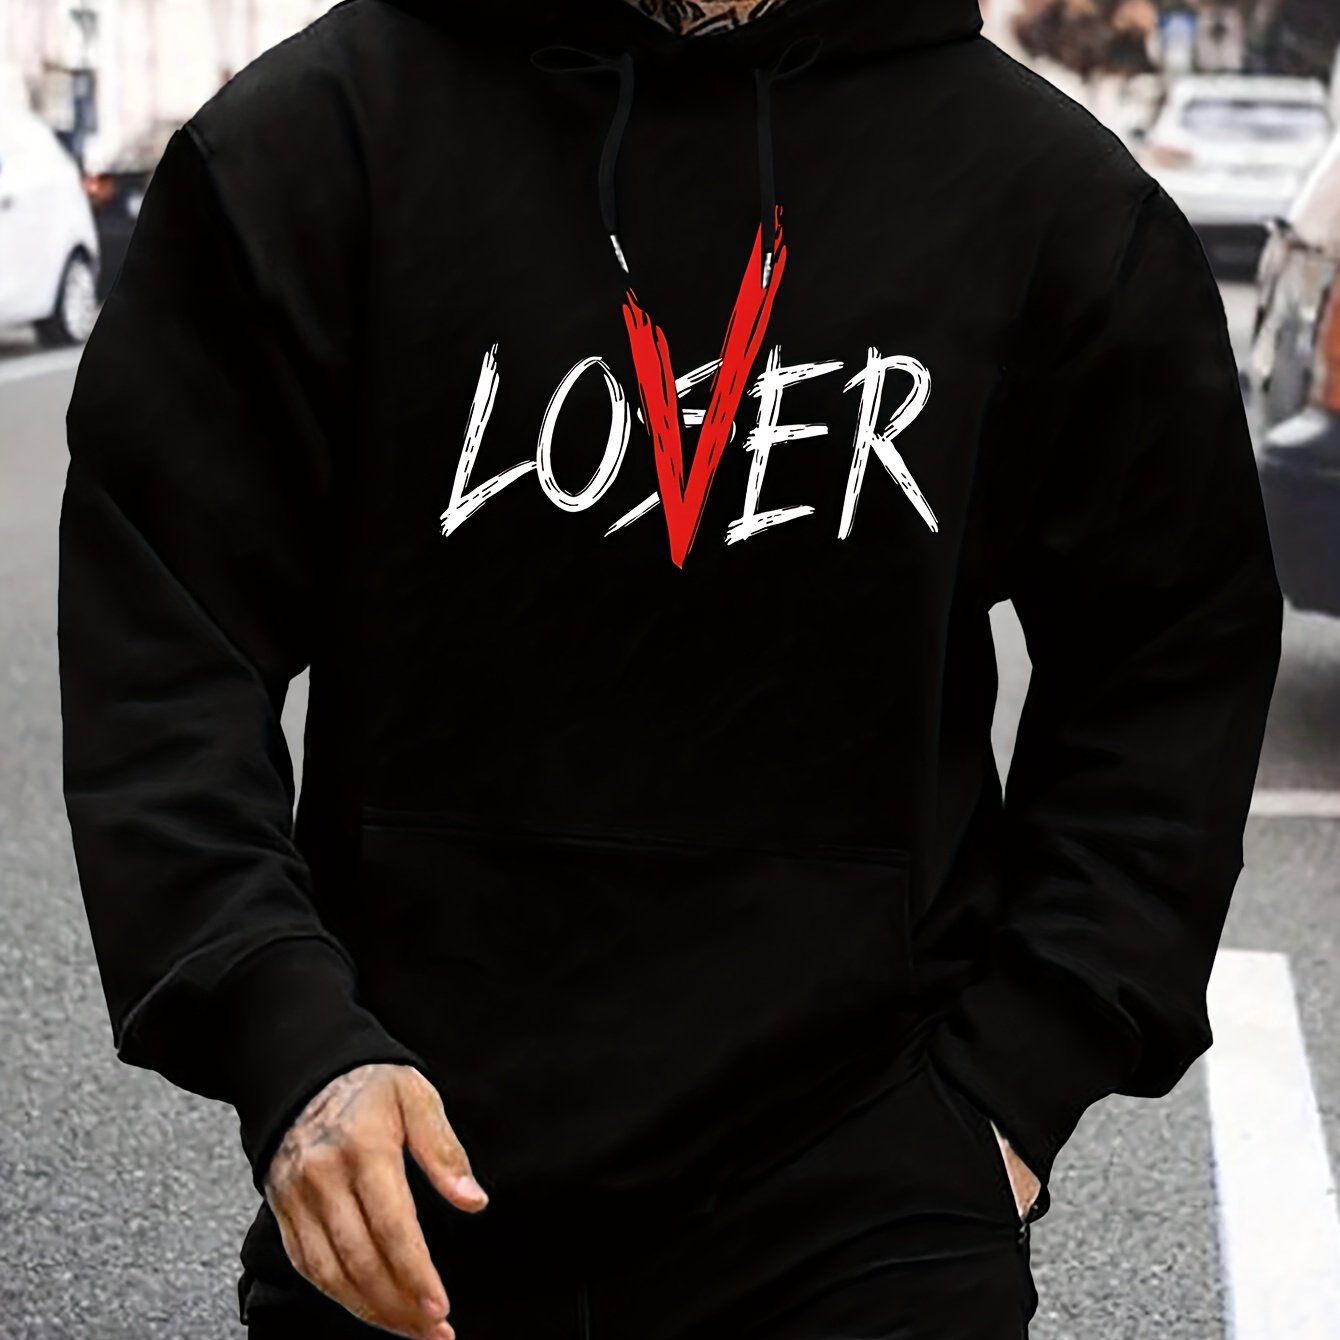 

Lover Print Men's Pullover Round Neck Long Sleeve Hooded Sweatshirt Pattern Loose Casual Top For Autumn Winter Men's Clothing As Gifts